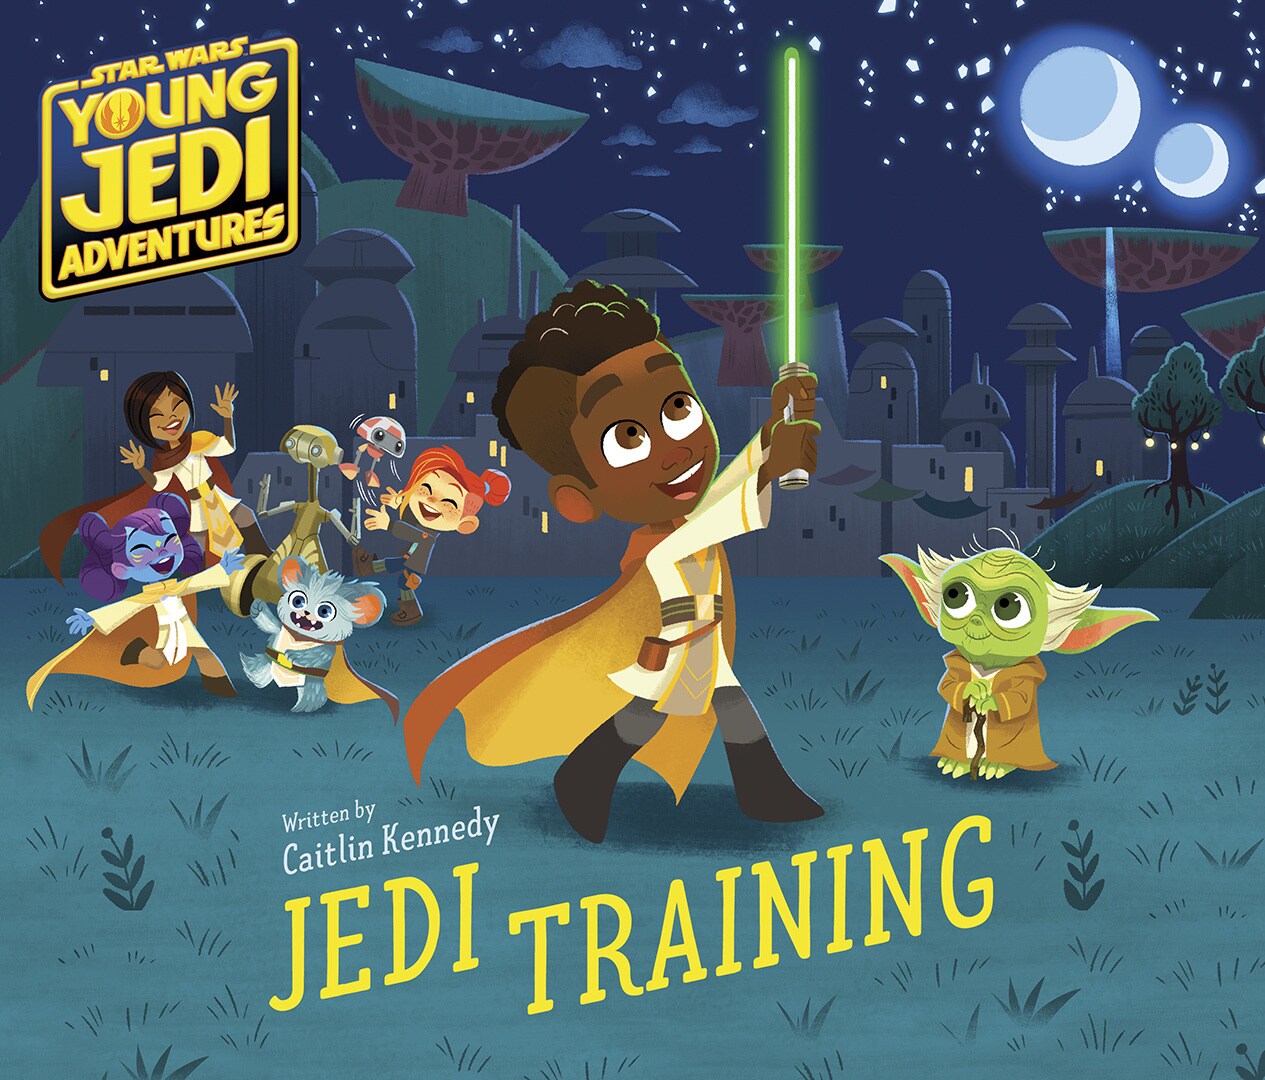 Star Wars: Young jedi Adventures picture book cover